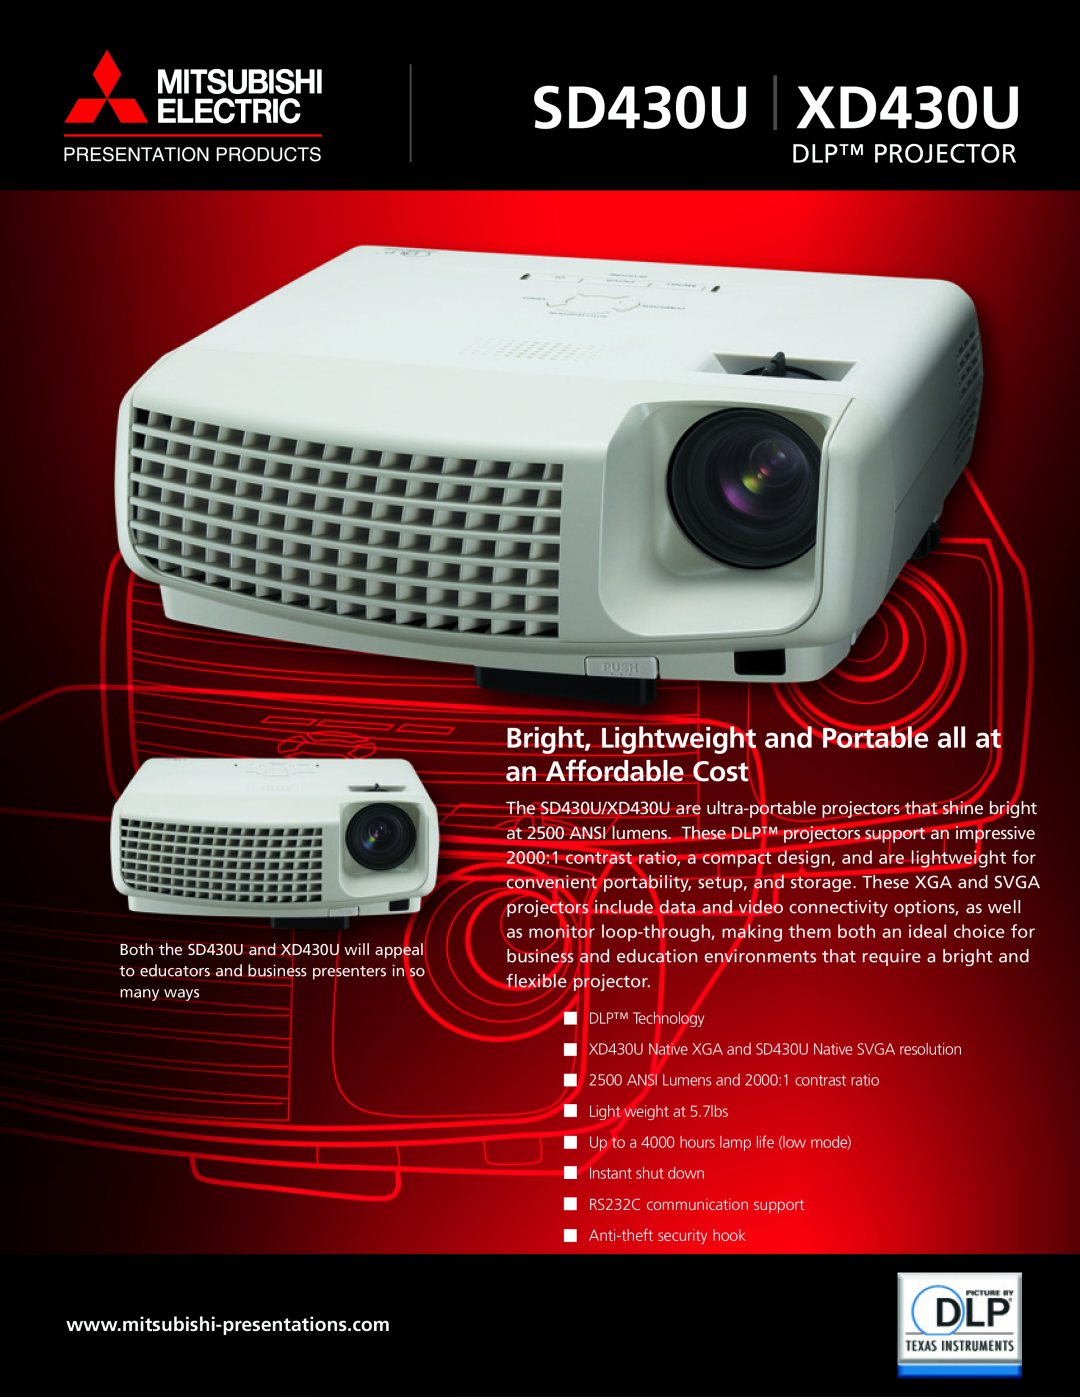 Mitsubishi Electronics manual SD430U XD430U, Bright, Lightweight and Portable all at an Affordable Cost, Dlp Projector 